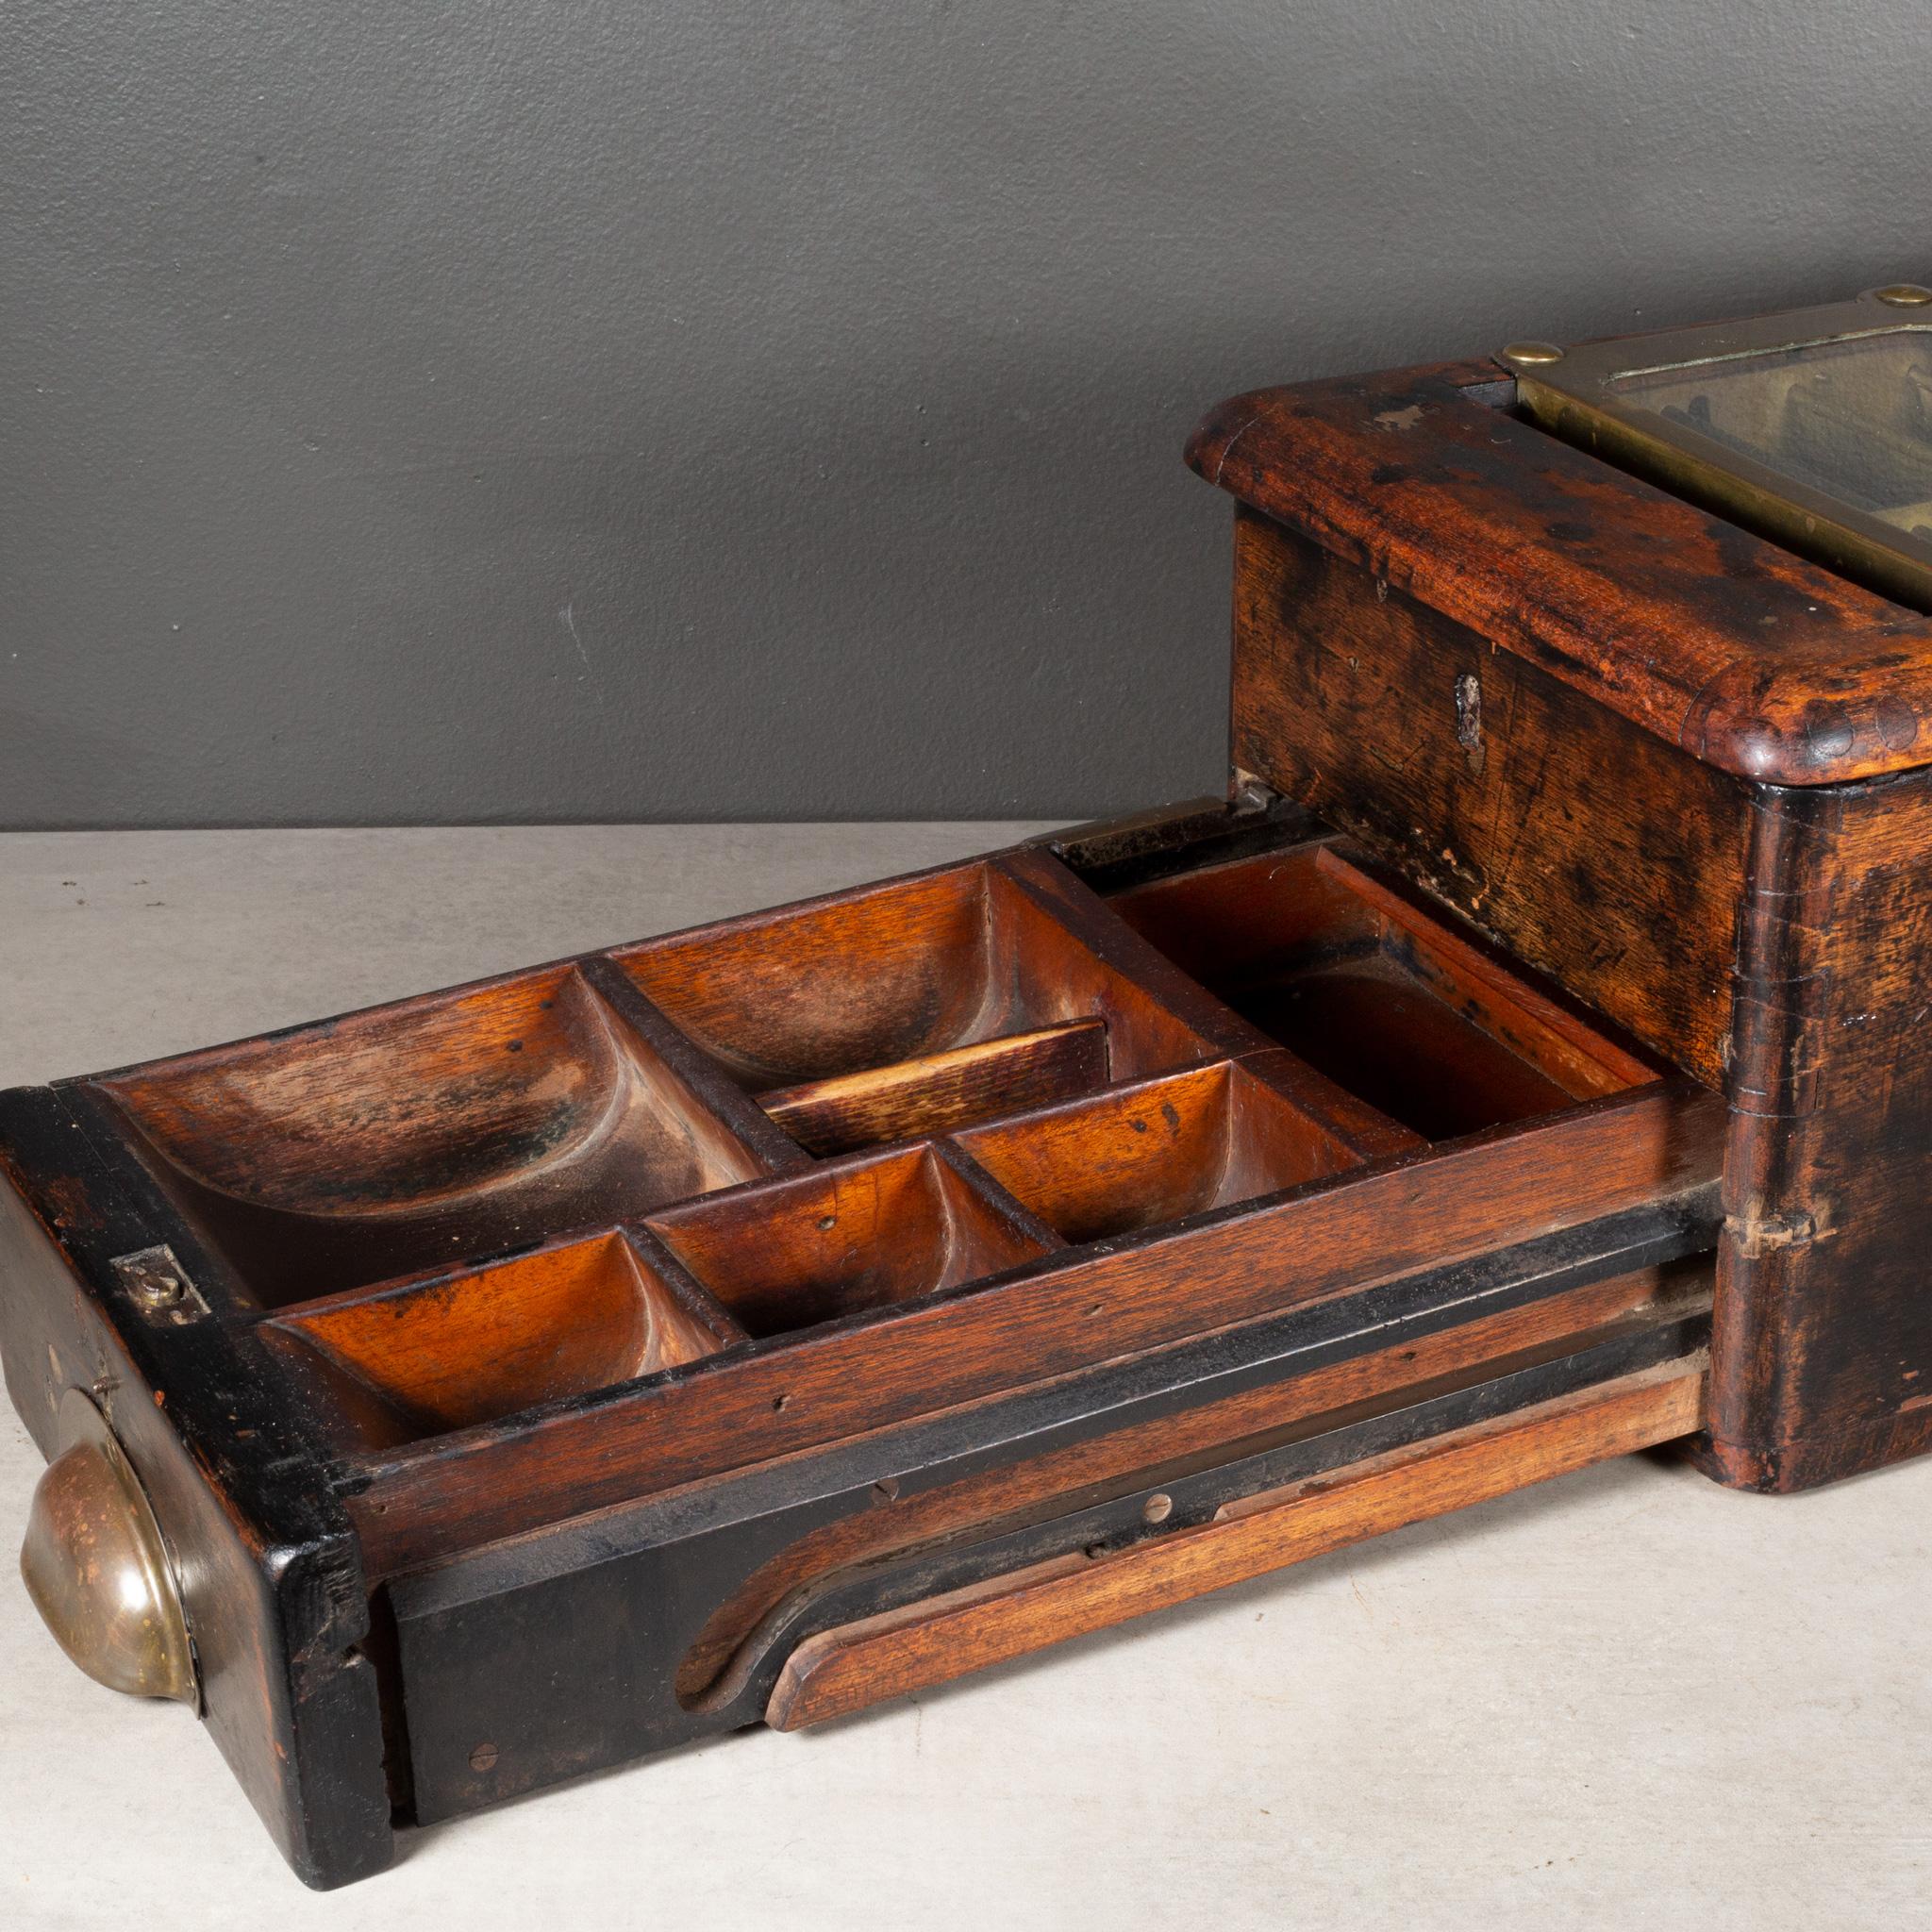 ABOUT

Antique O'Brien's self-closing cash till with original maker's plaque and seven sculpted money compartments. The solid Mahogany case is constructed with dovetail joints and has one large glass window and one smaller window both surrounded by